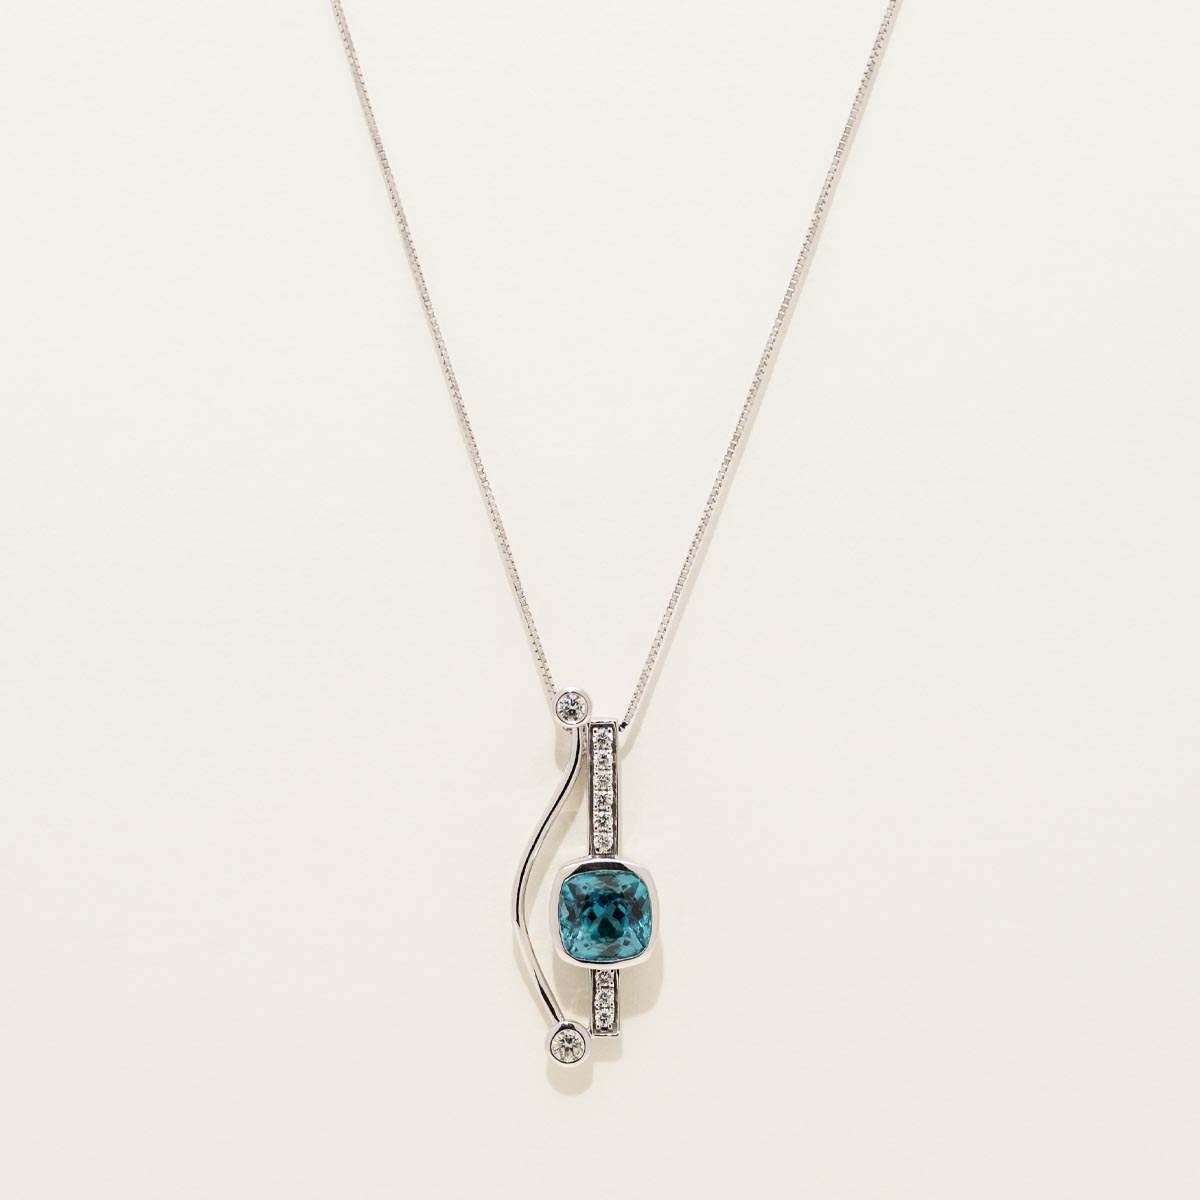 Blue Zircon Necklace in 14kt White Gold with Diamonds (1/5ct tw)